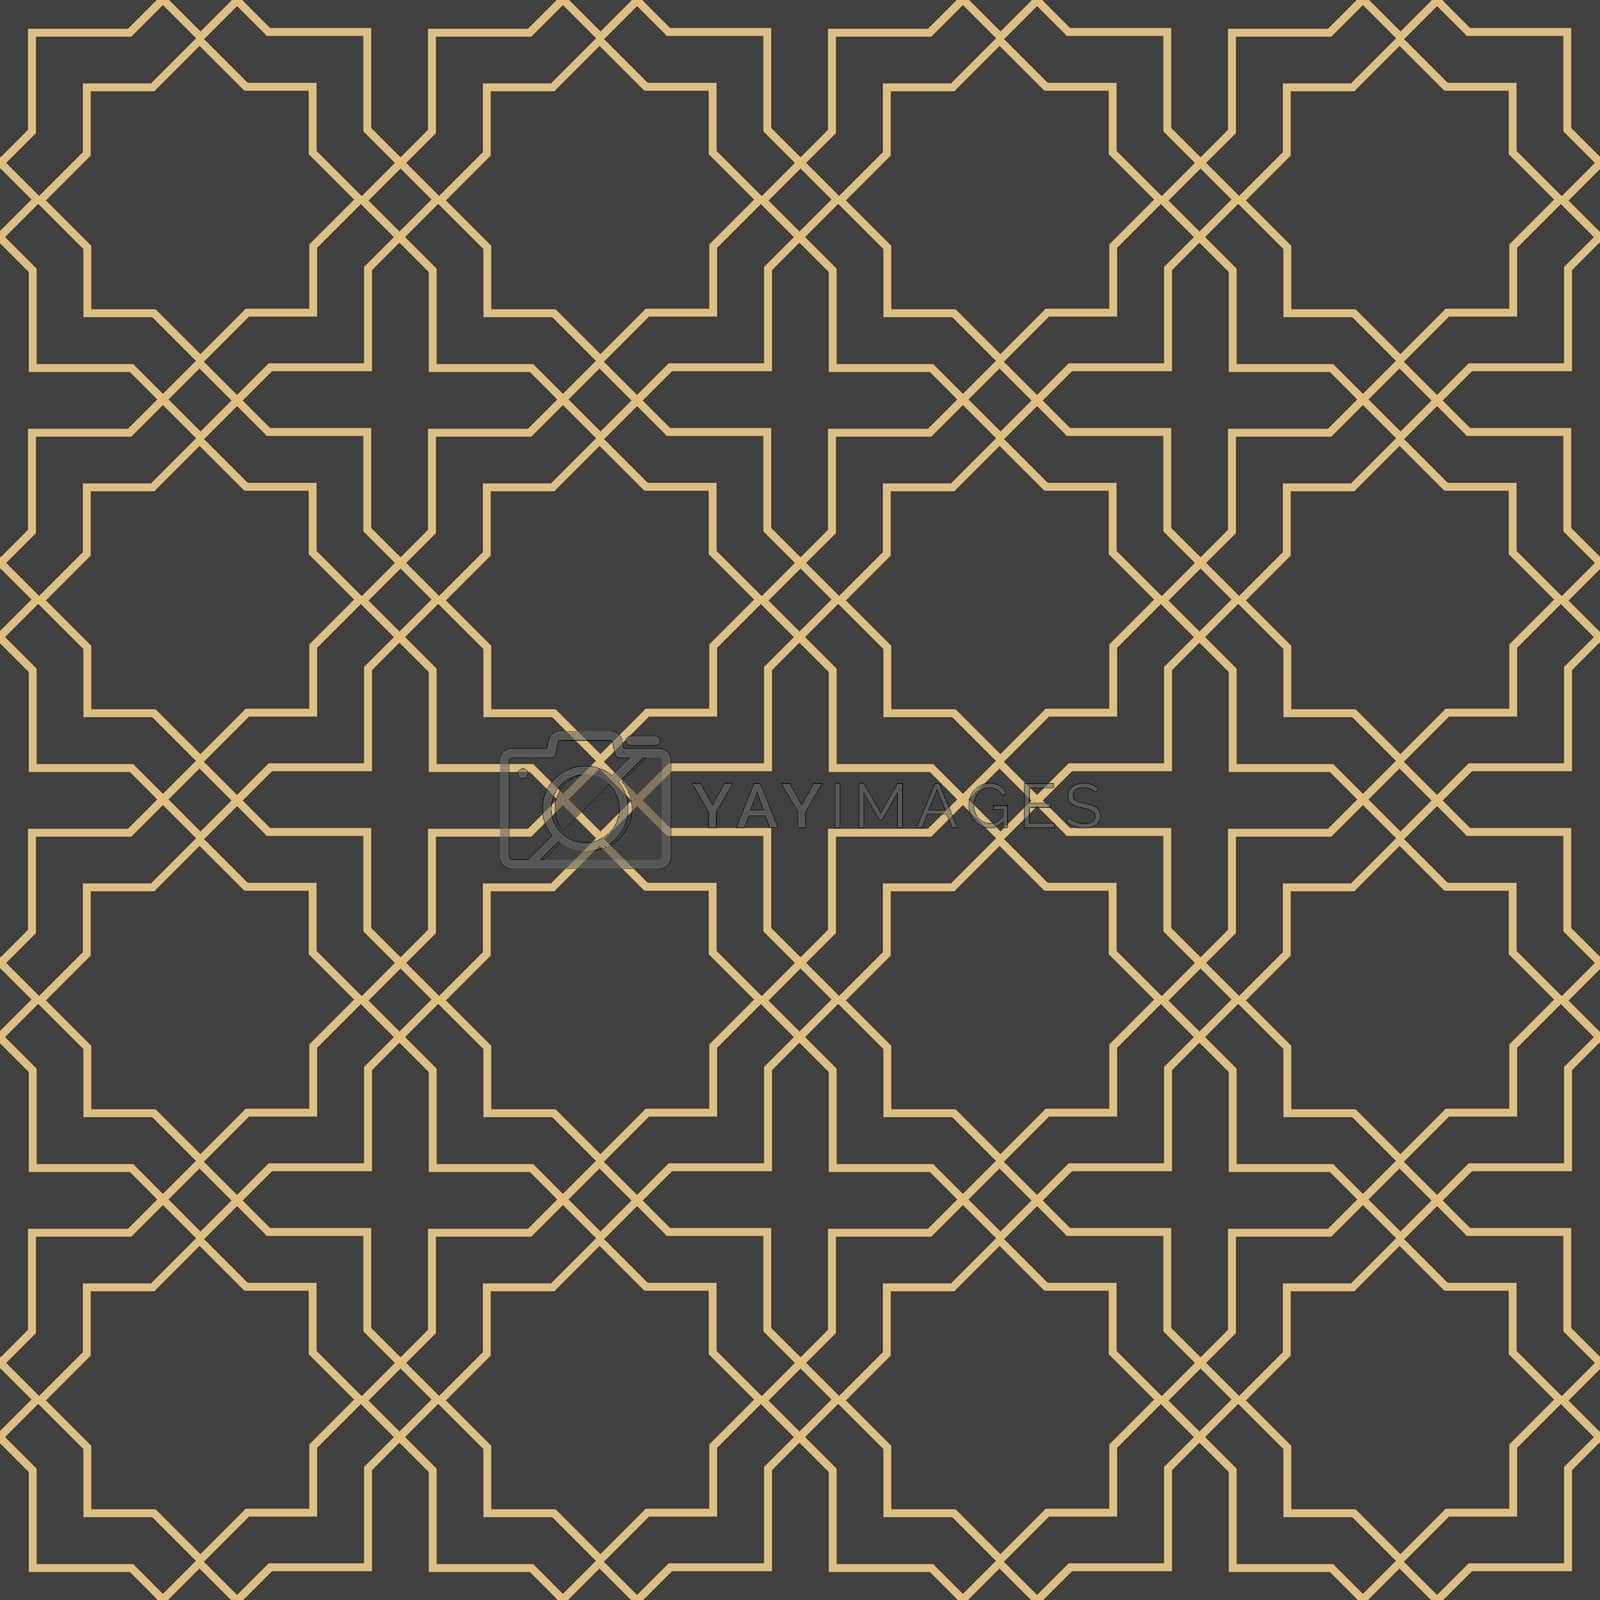 Arabic ornaments. Patterns, backgrounds and wallpapers for your design. Textile ornament. Vector illustration.